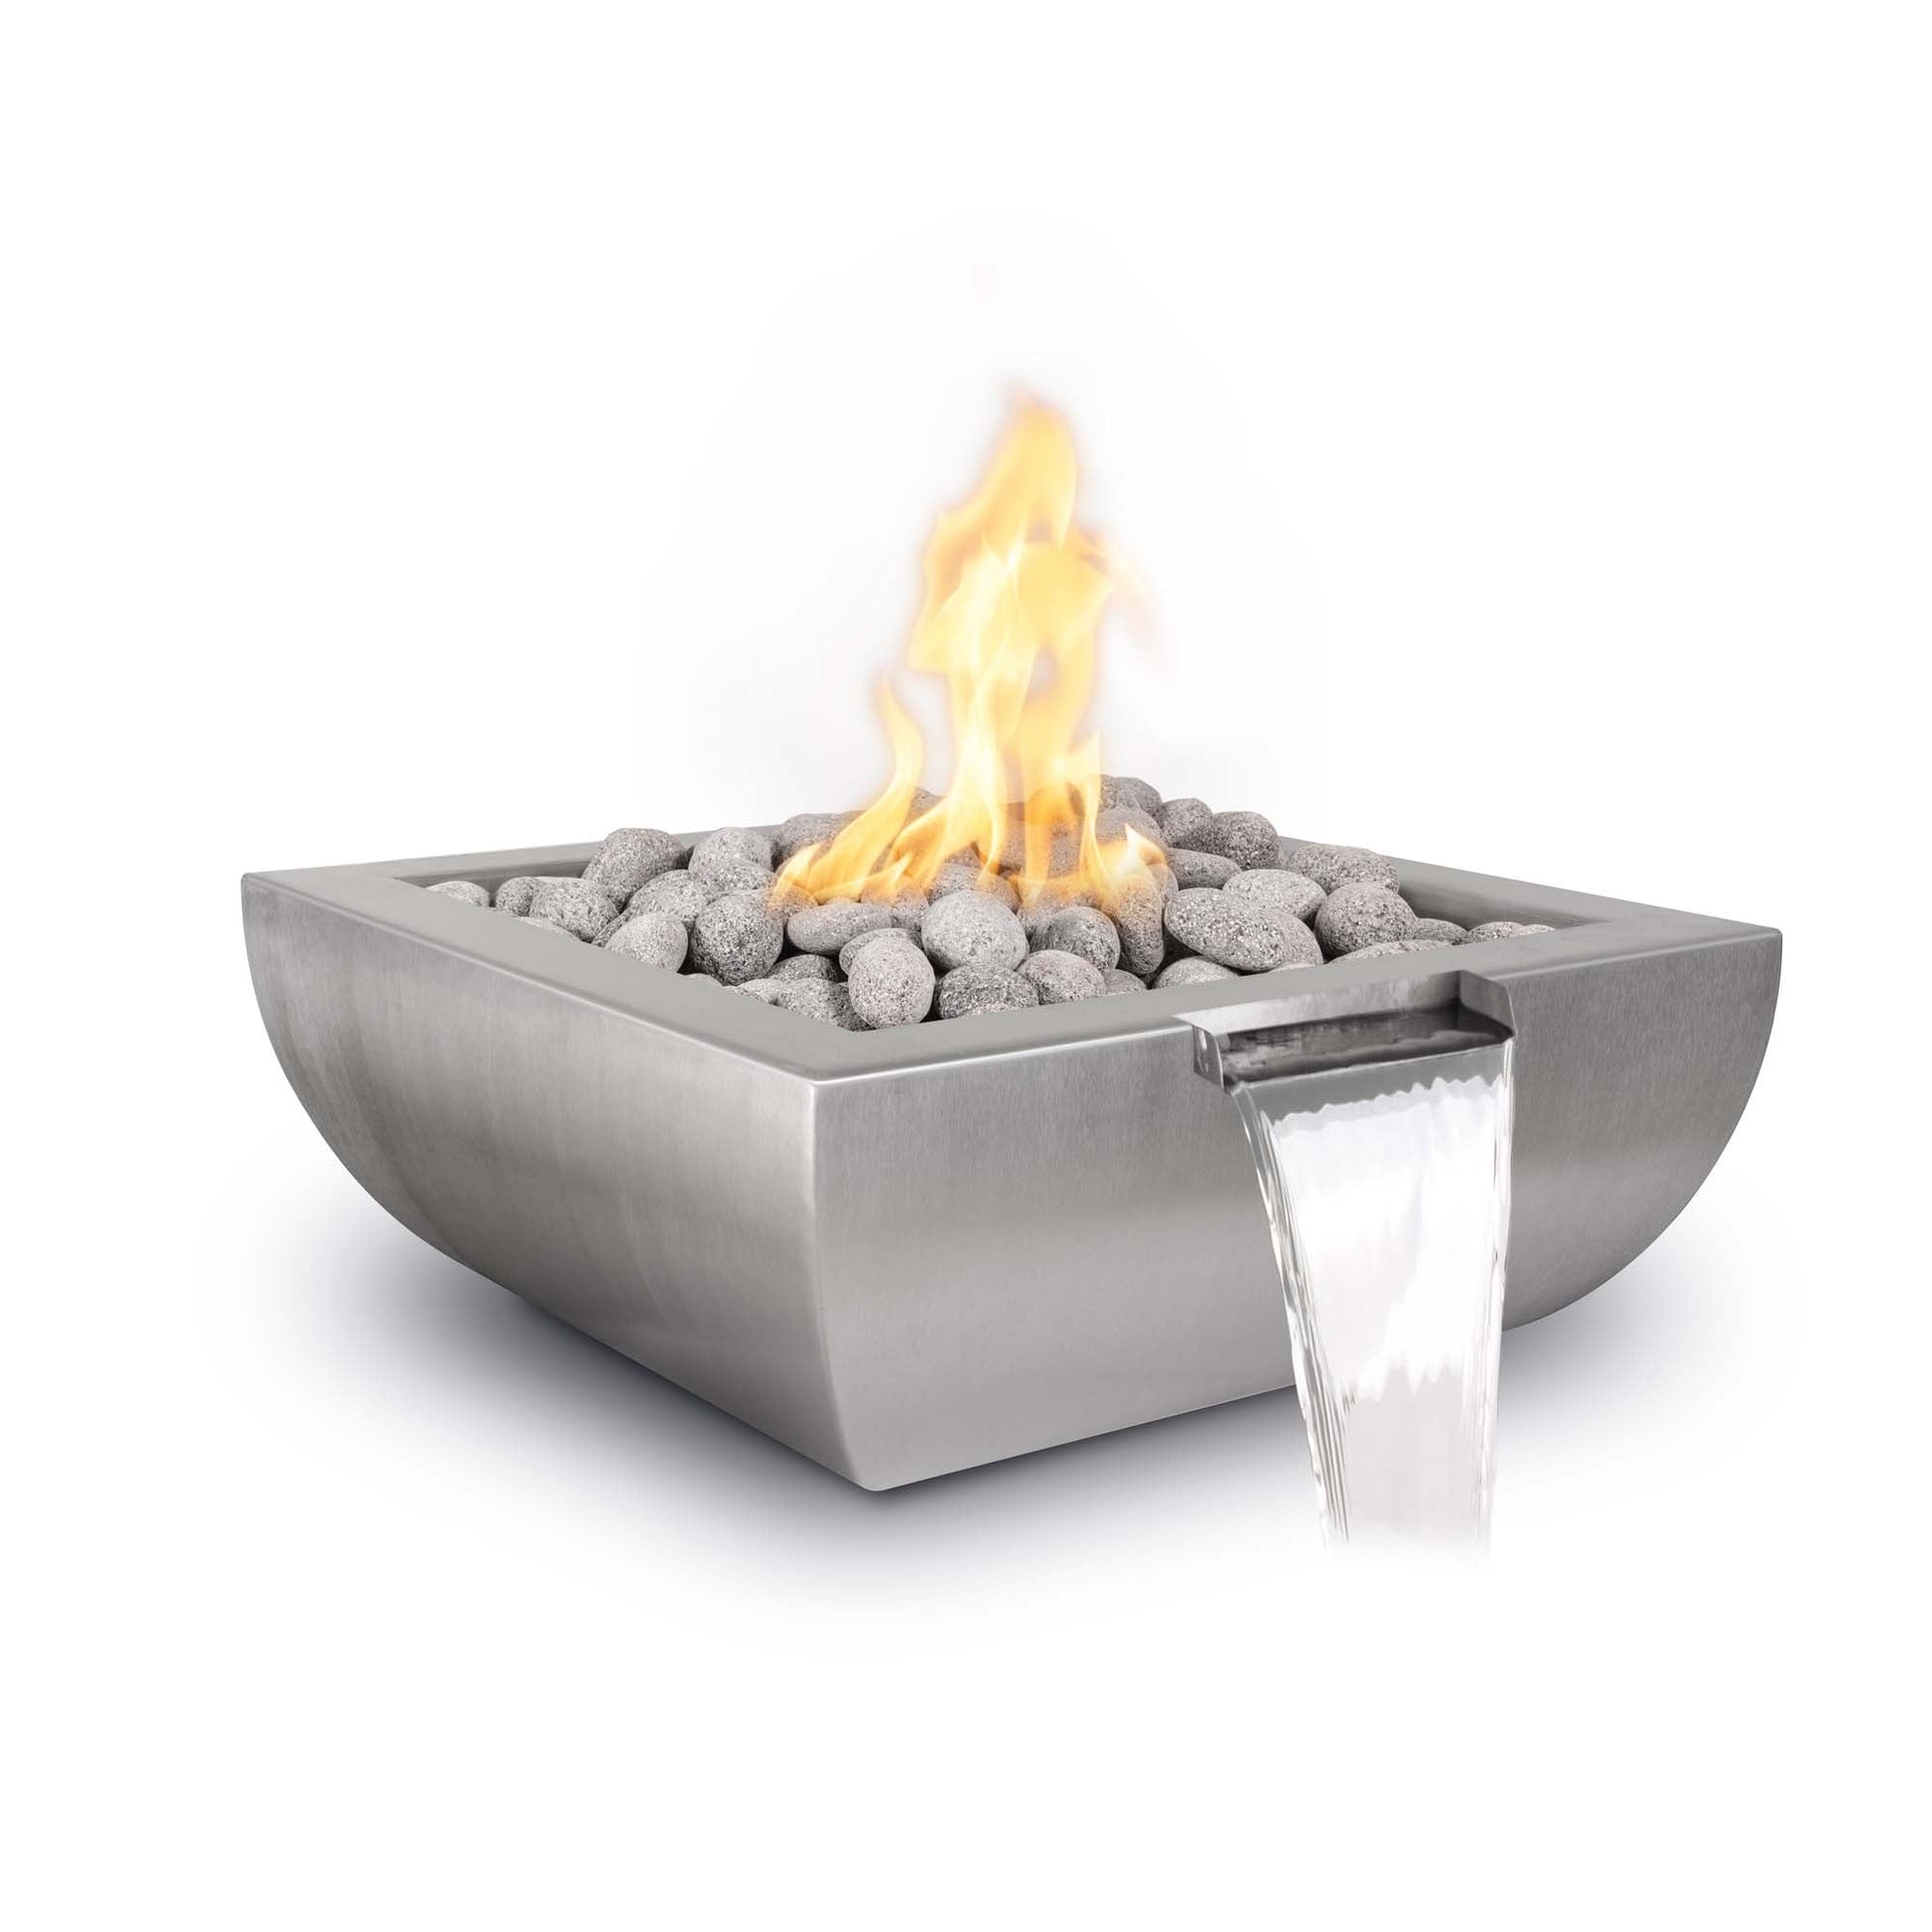 24" Avalon Stainless Steel Fire & Water Bowl - 12V Electronic Ignition-Novel Home